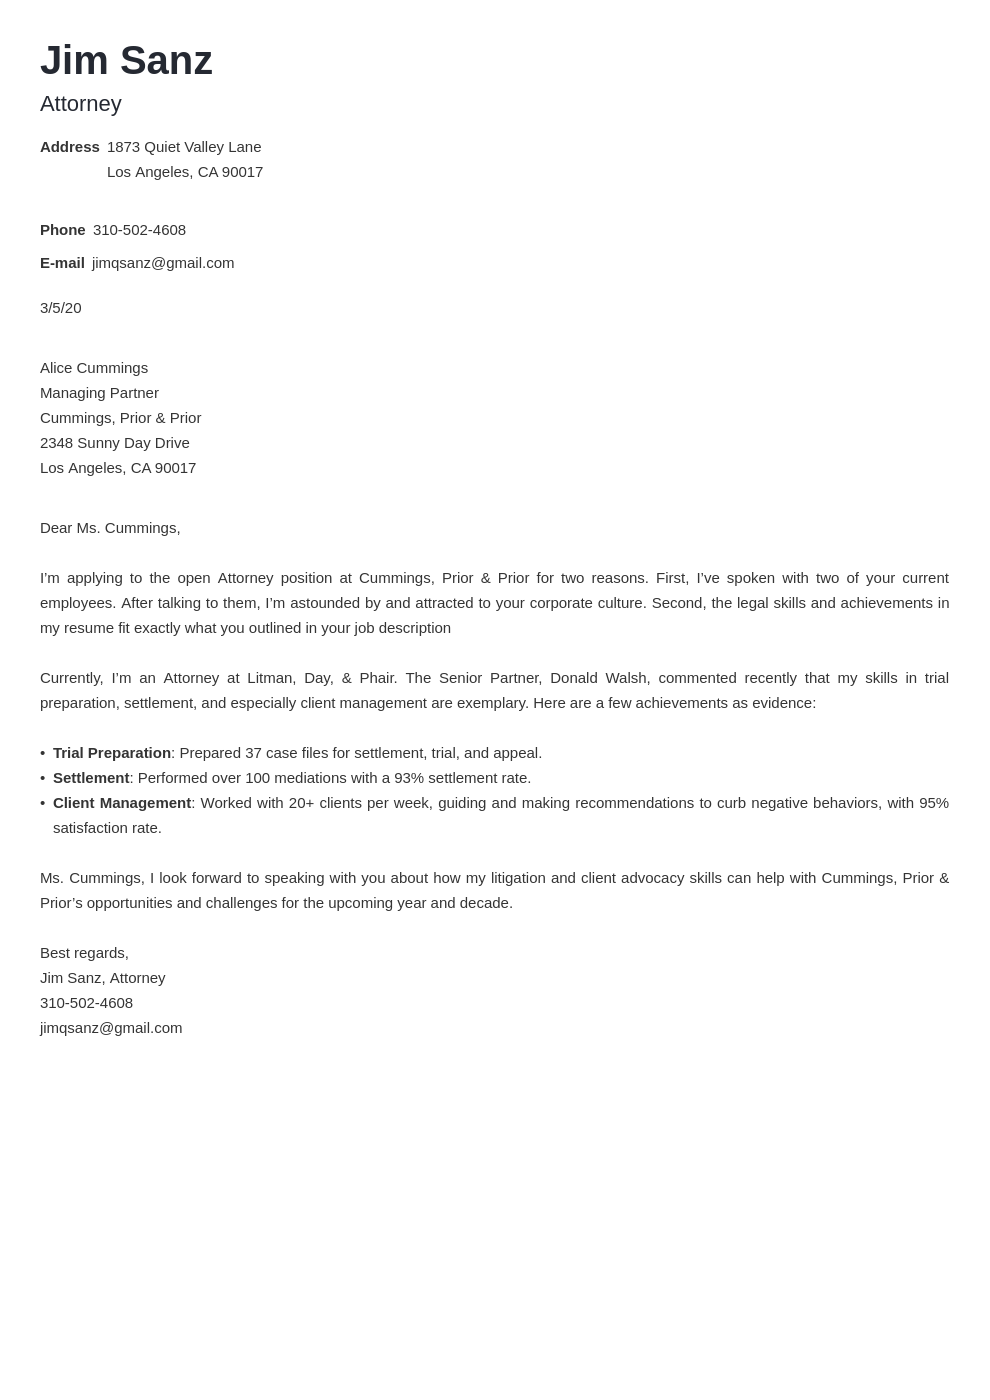 sample cover letter of a lawyer